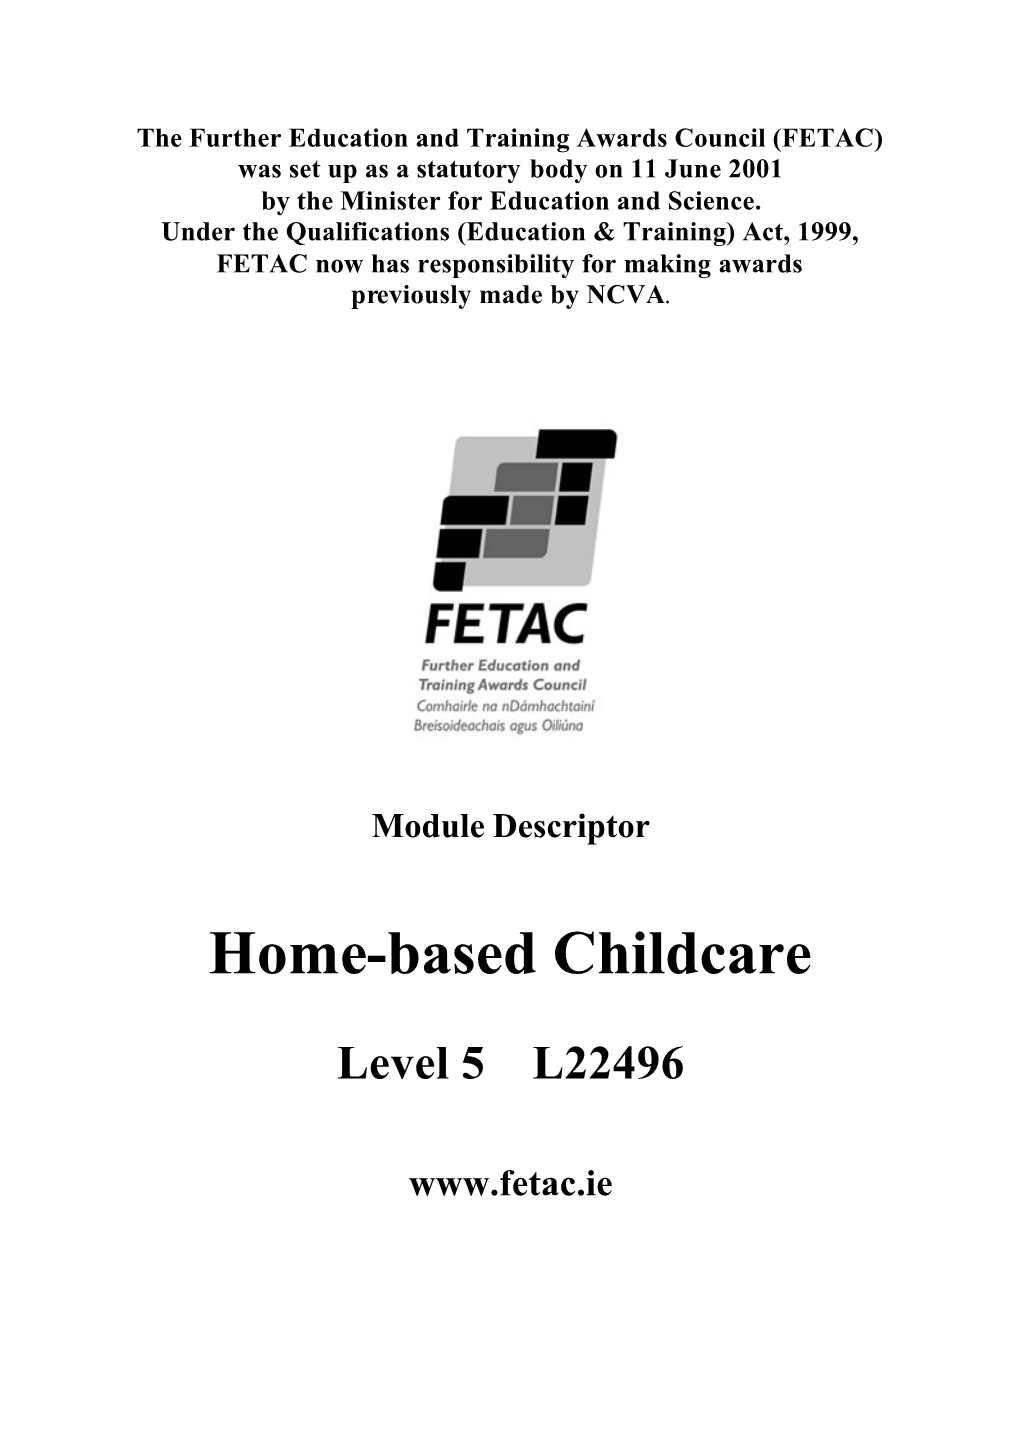 Home-Based Childcare